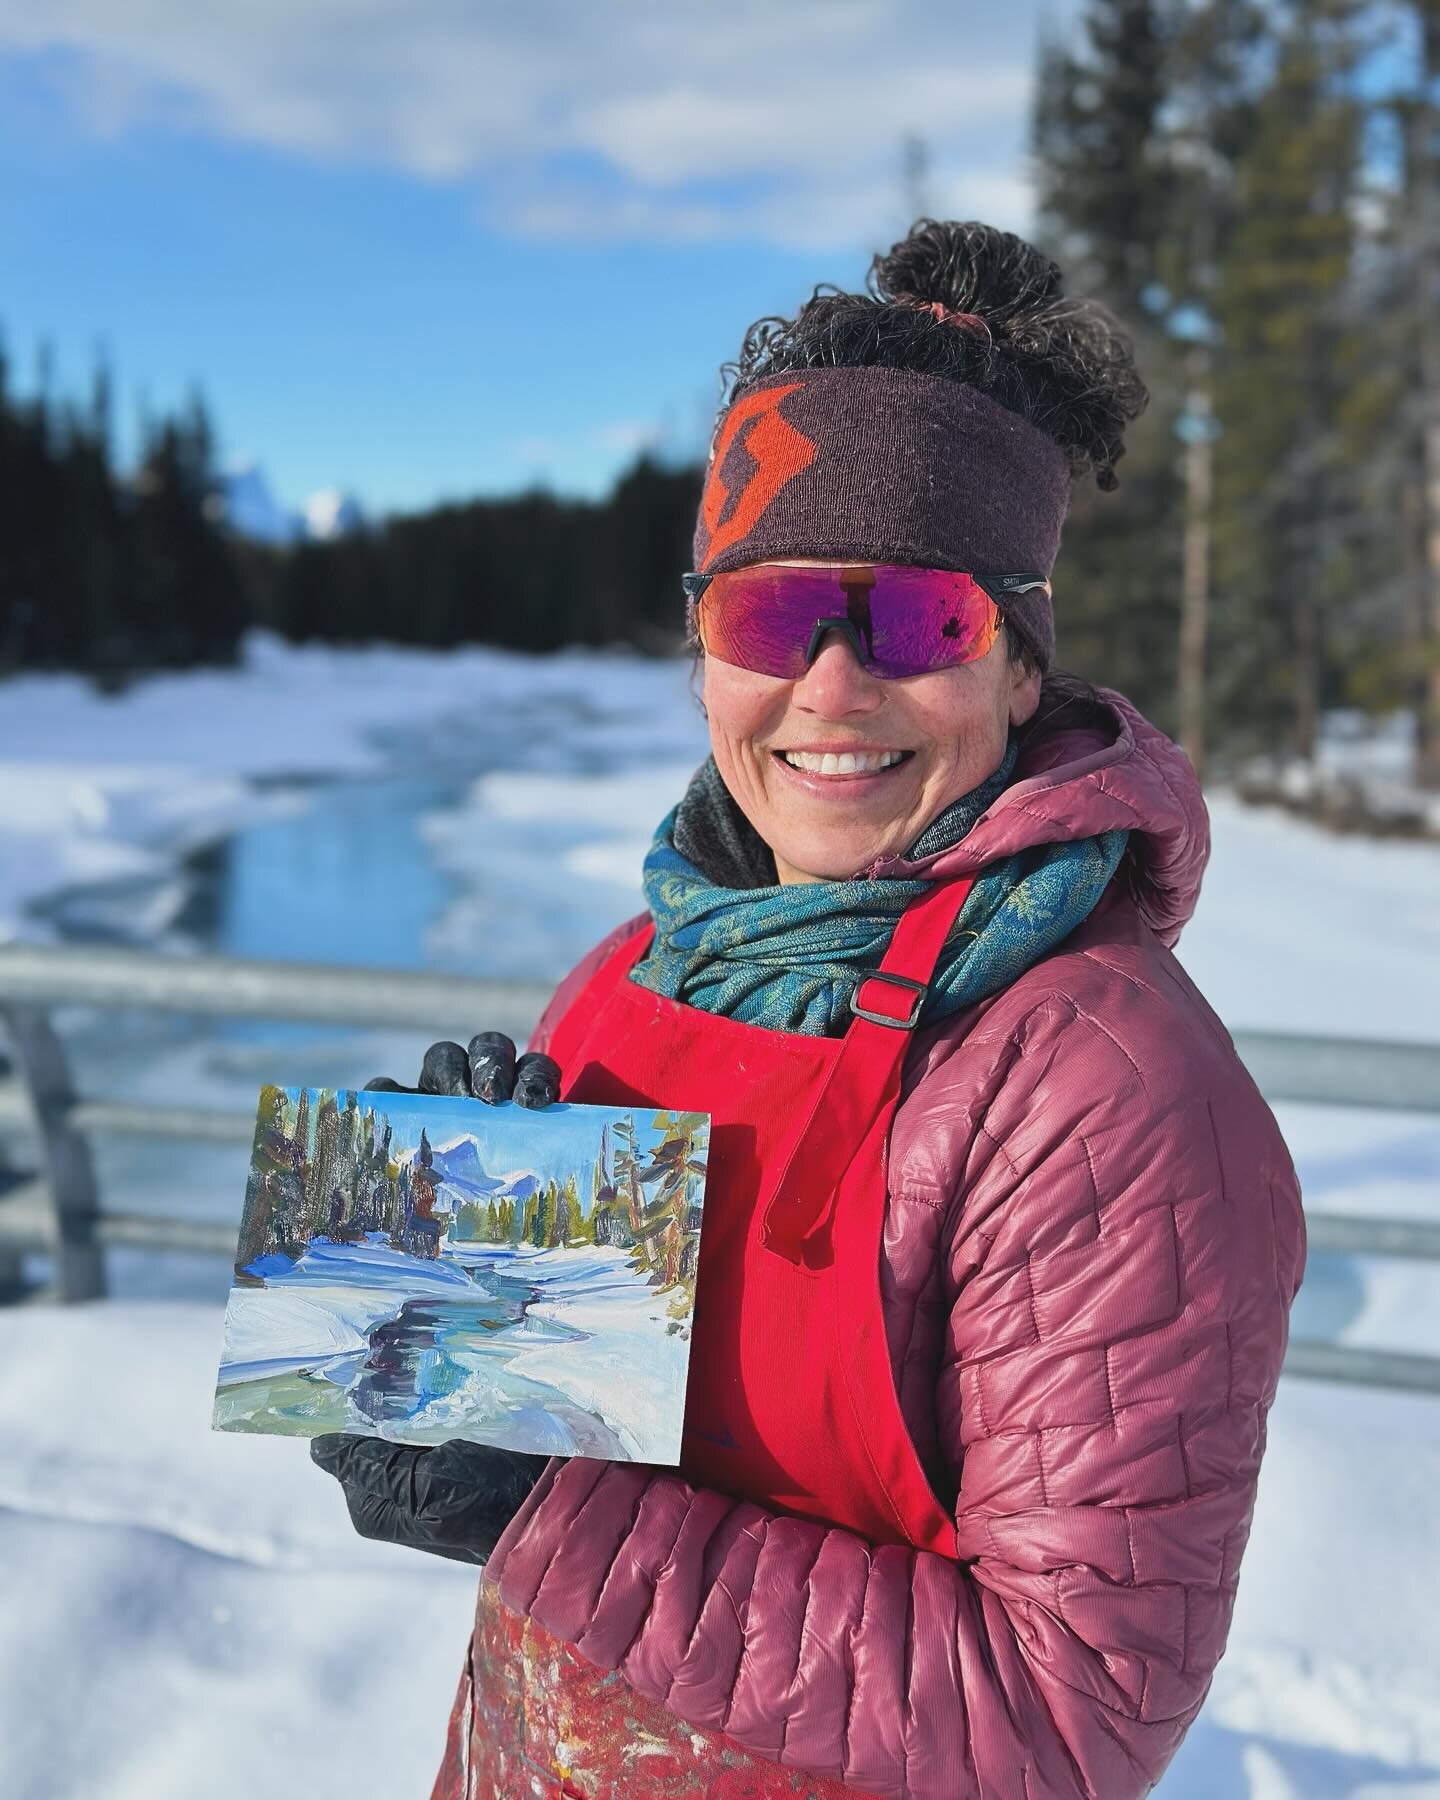 Last week&rsquo;s Plein air painting sessions with my pal @melaniemacvoy .
It isn&rsquo;t often that I get out painting outdoors in the winter, but last week we were just on a mission to get out and collect as much Rocky Mountain Magnificence as we c